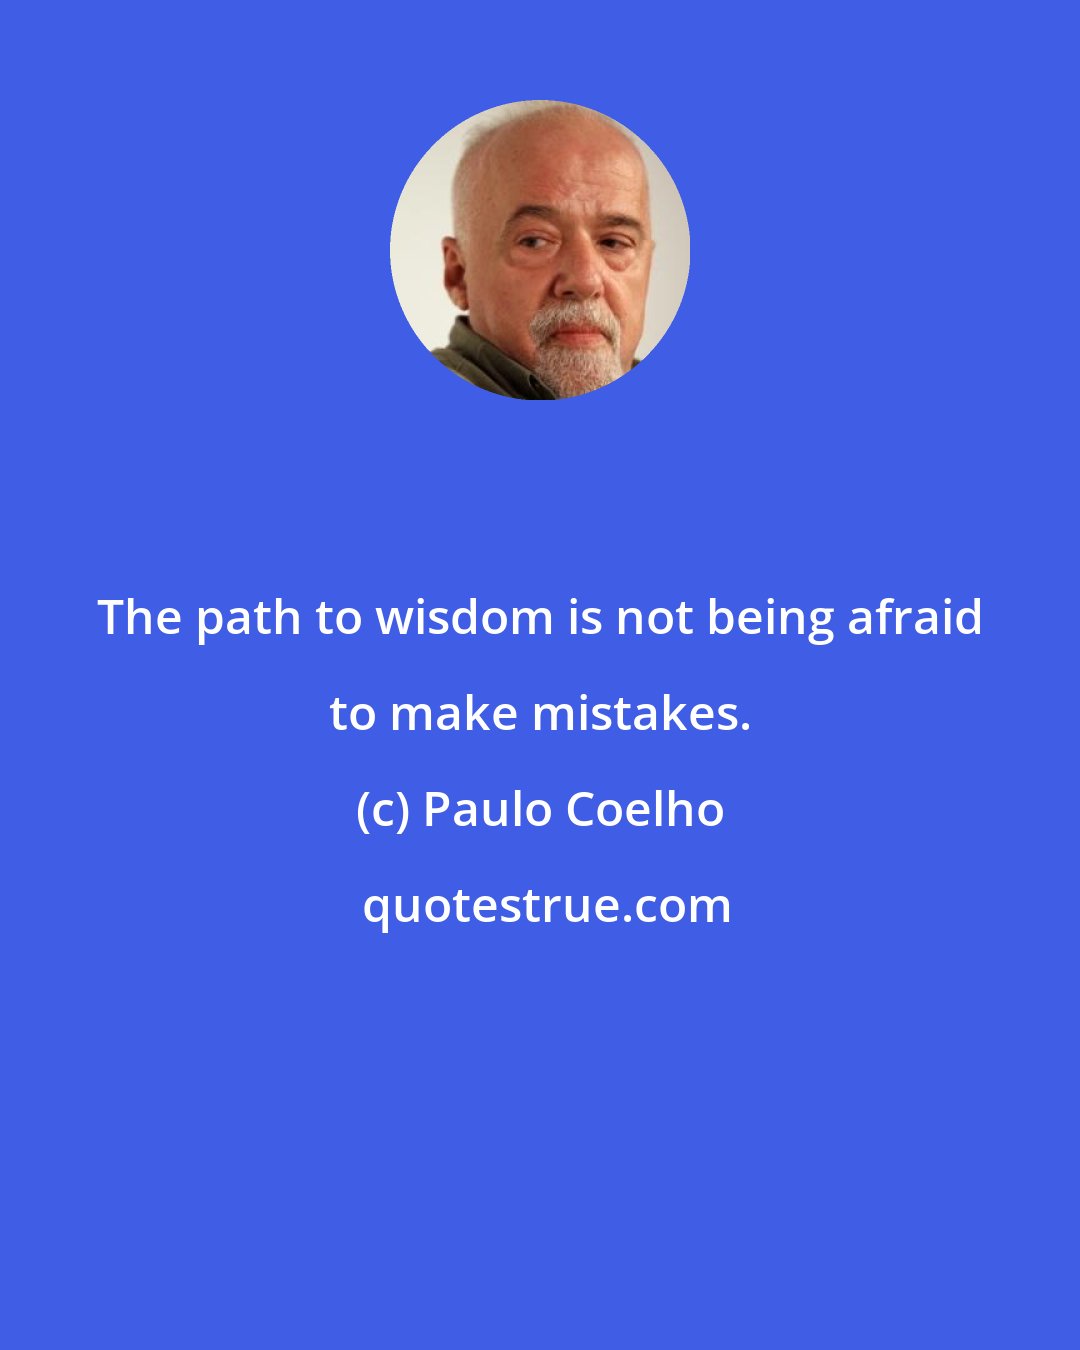 Paulo Coelho: The path to wisdom is not being afraid to make mistakes.